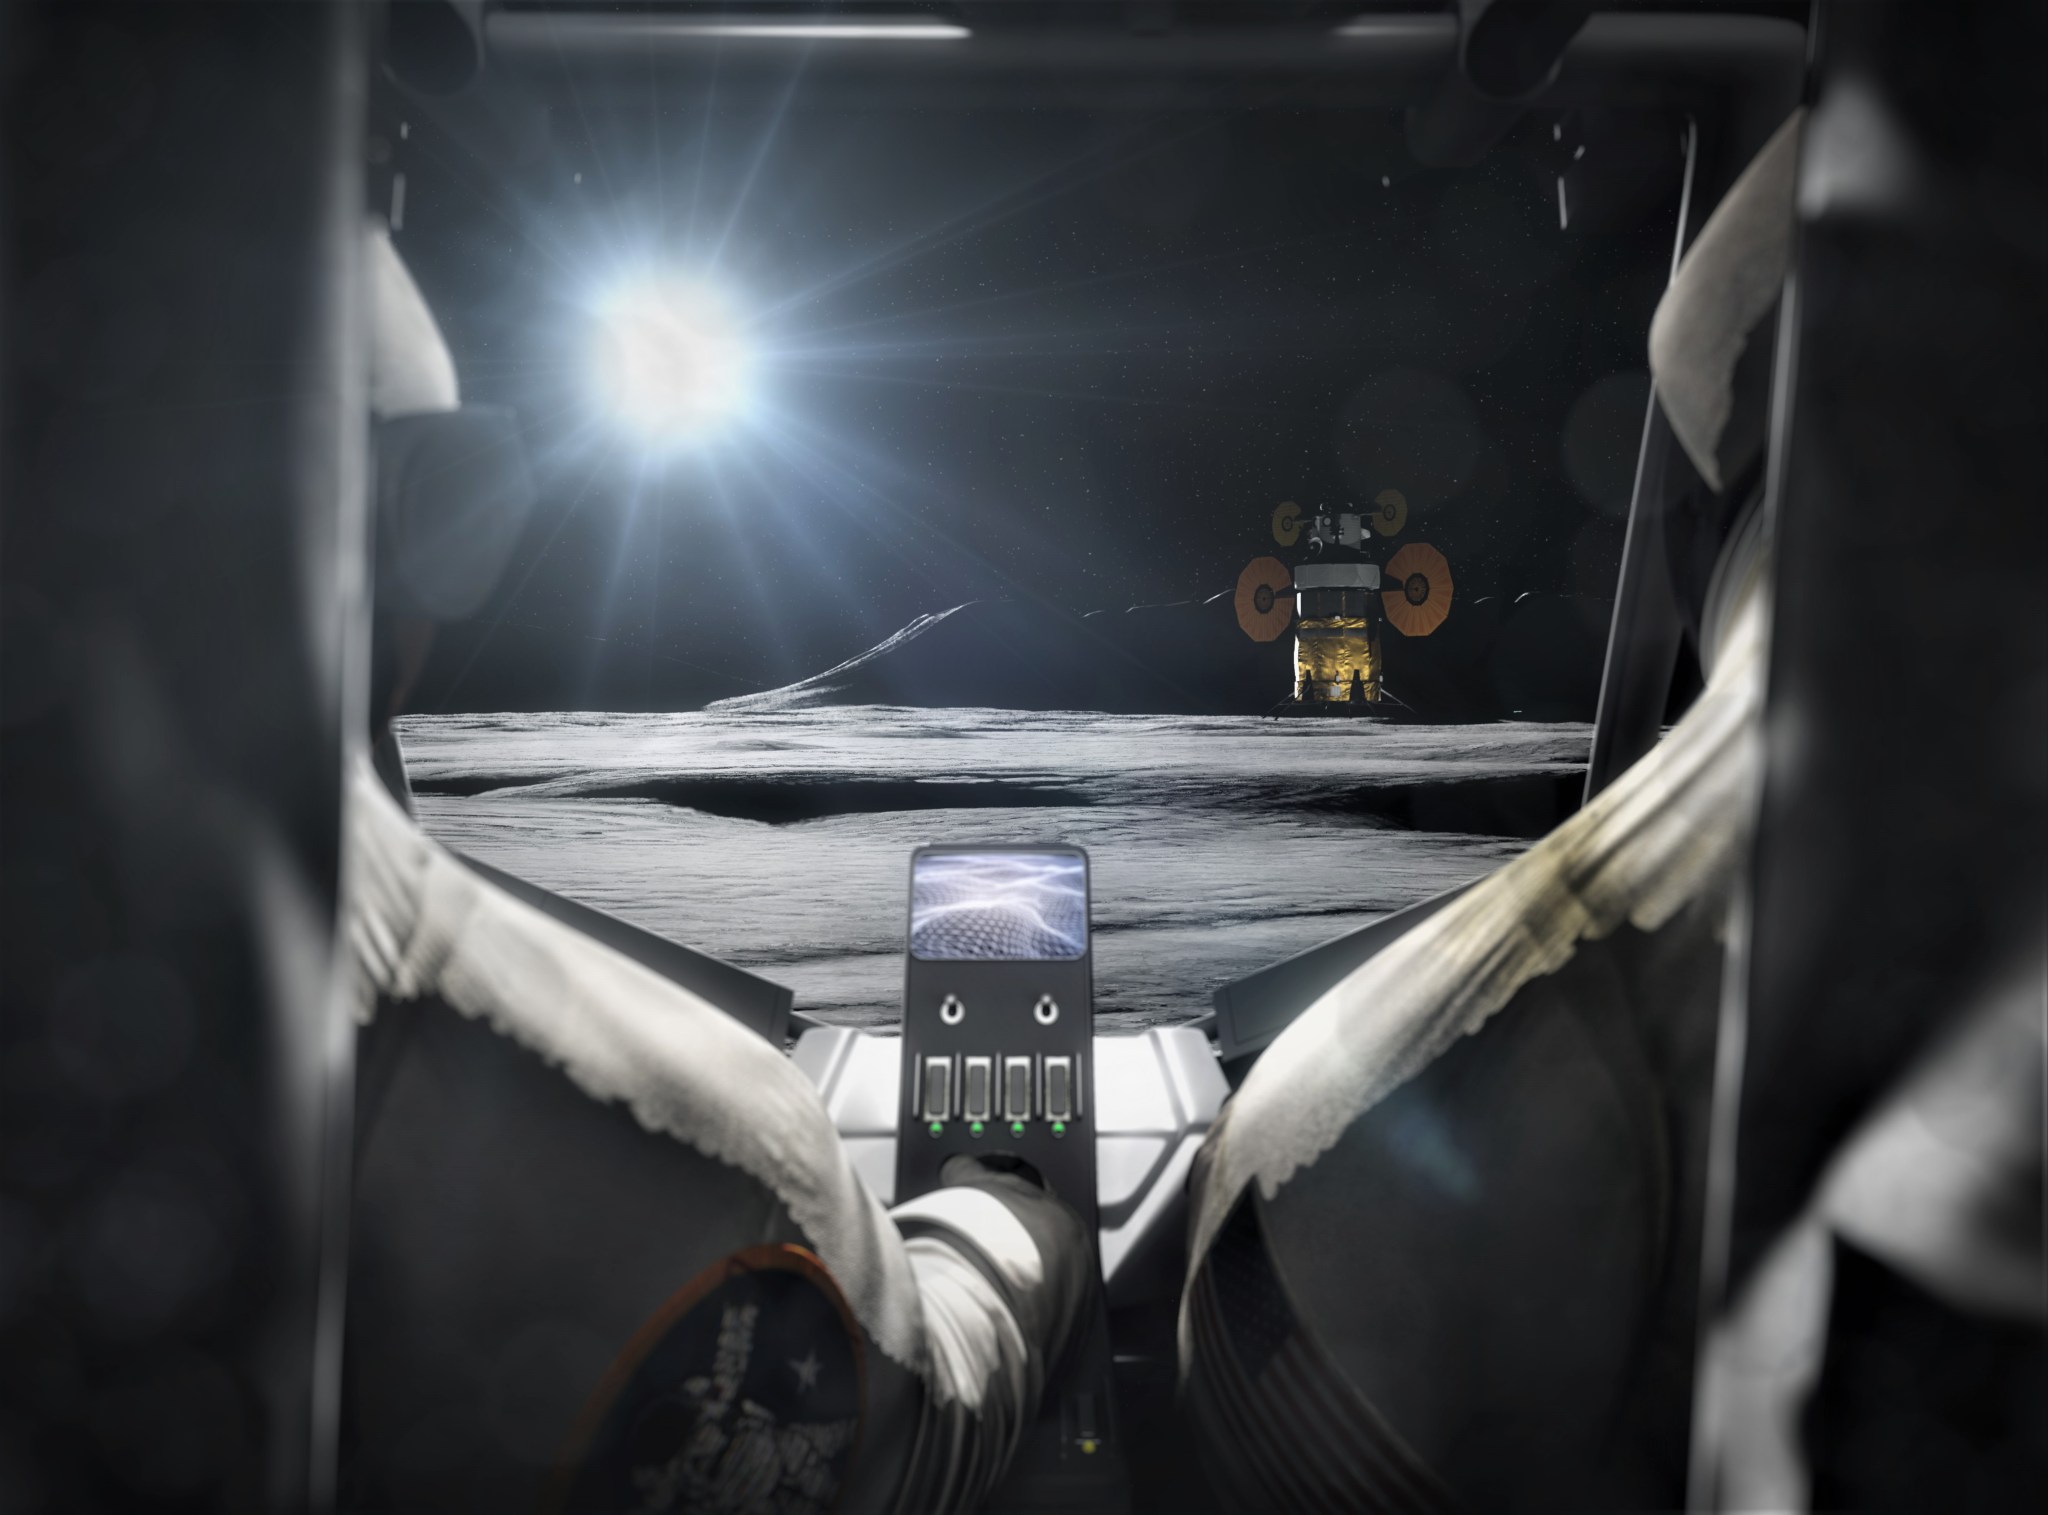 Concept image showing the backseat view in a Lunar Terrain Vehicle. 